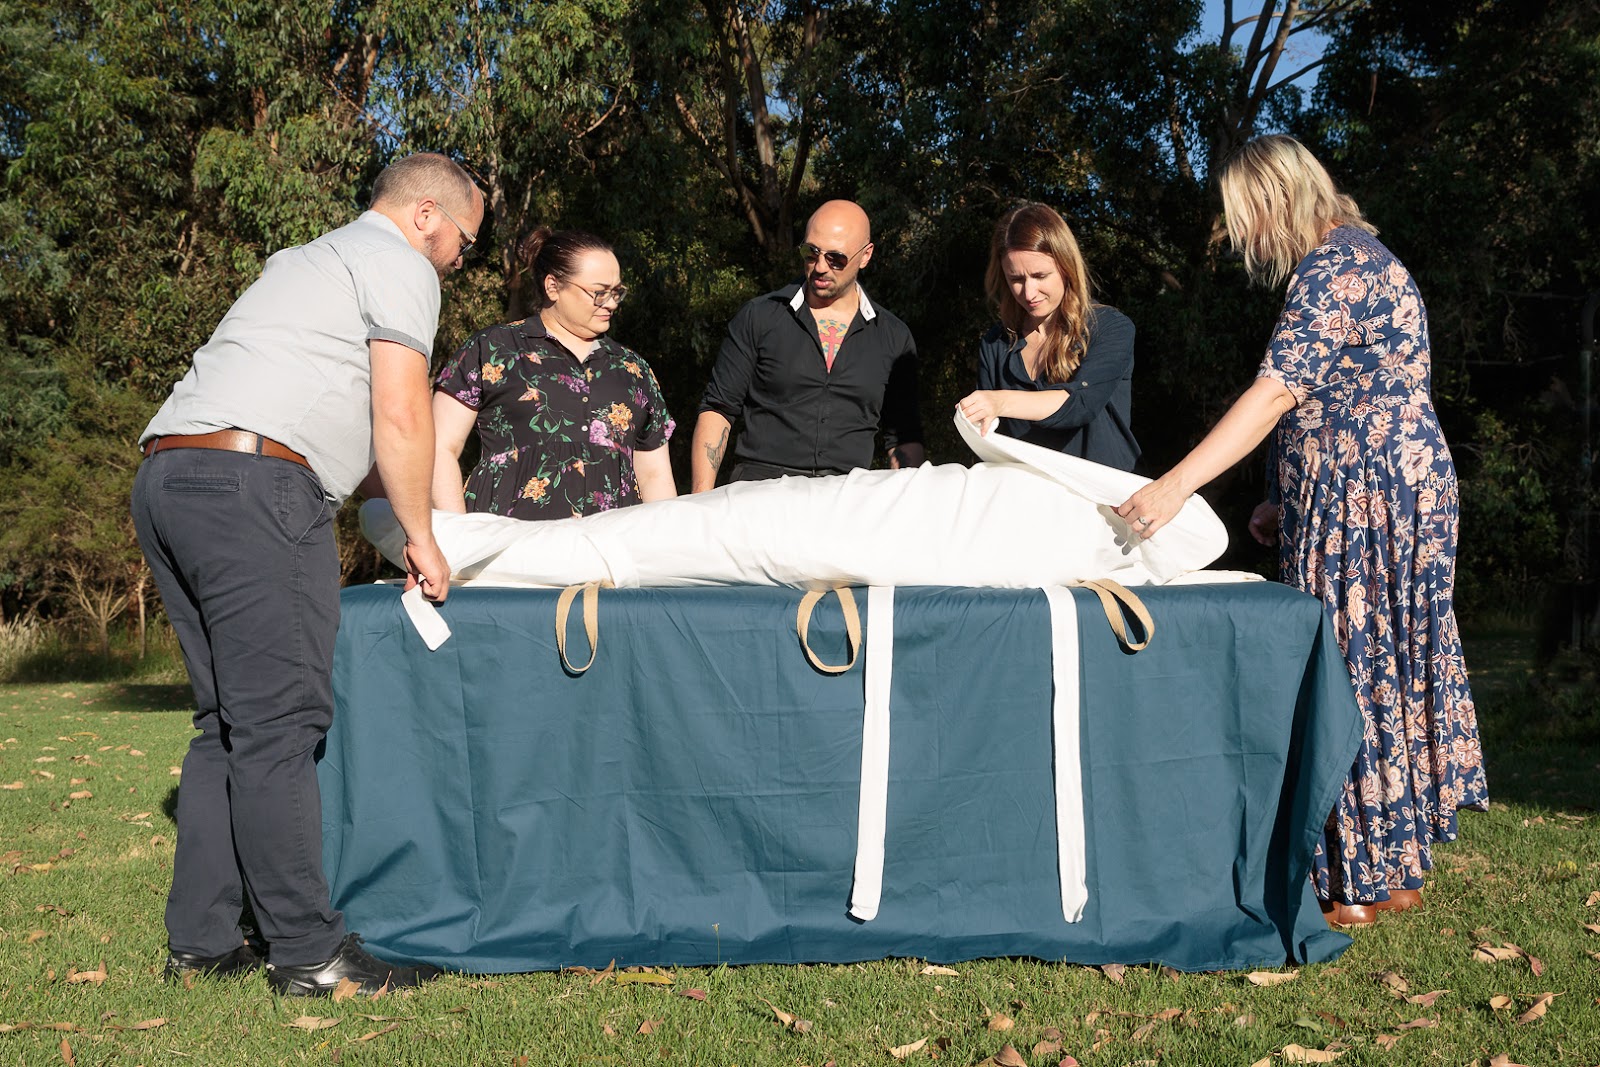 five people shrouding a body in a white shroud. set on a table covered in a teal sheet out side on the grass with trees in the back ground.